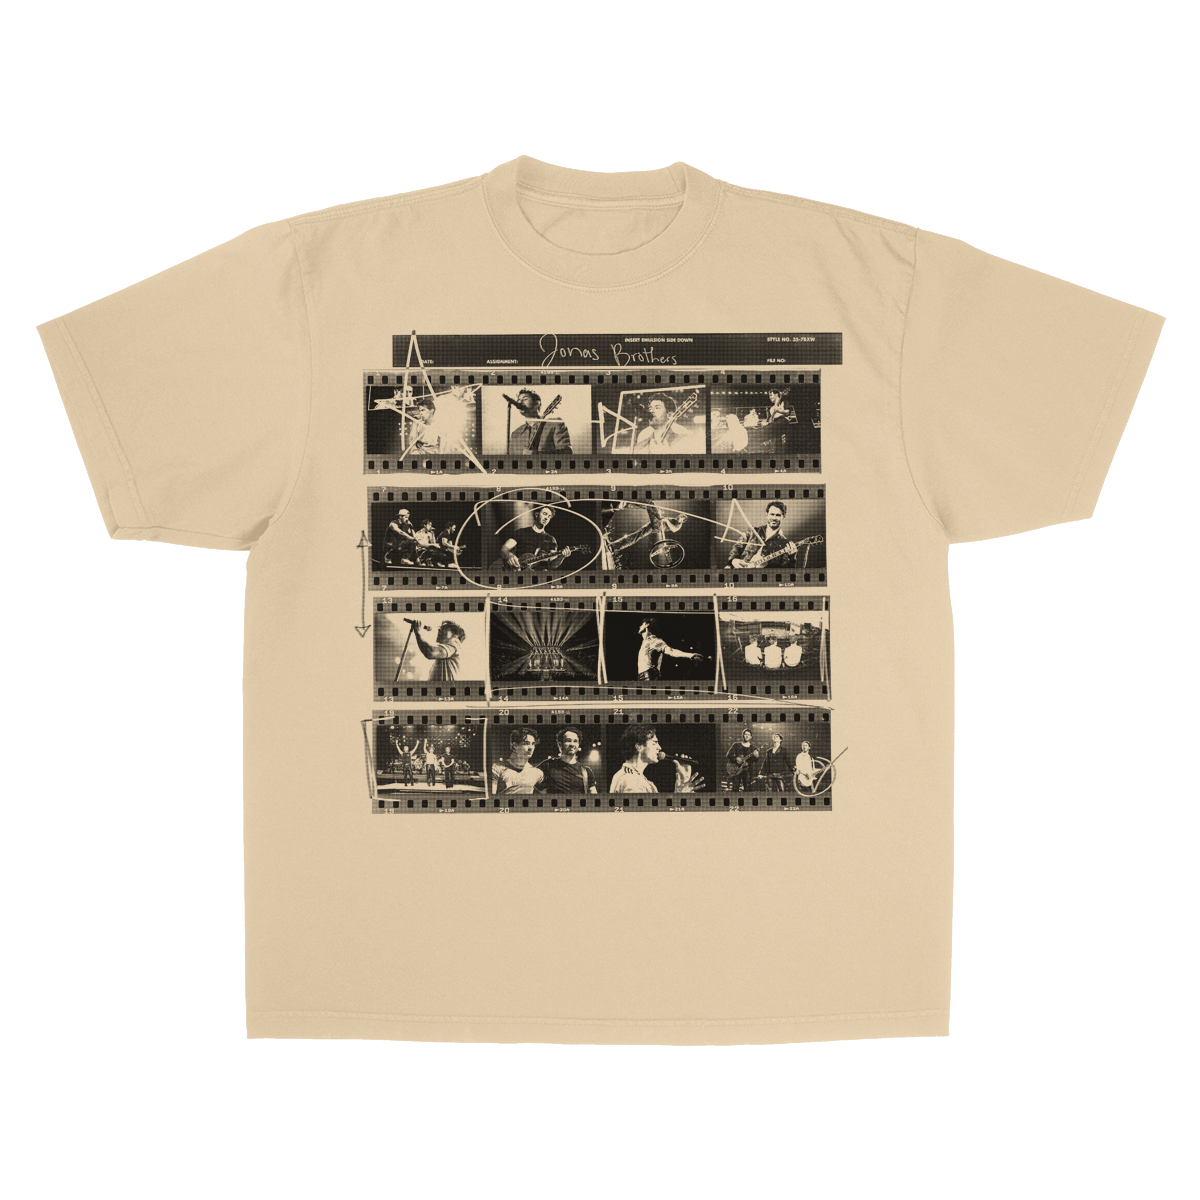 FILM ROLL TEE - NATURAL